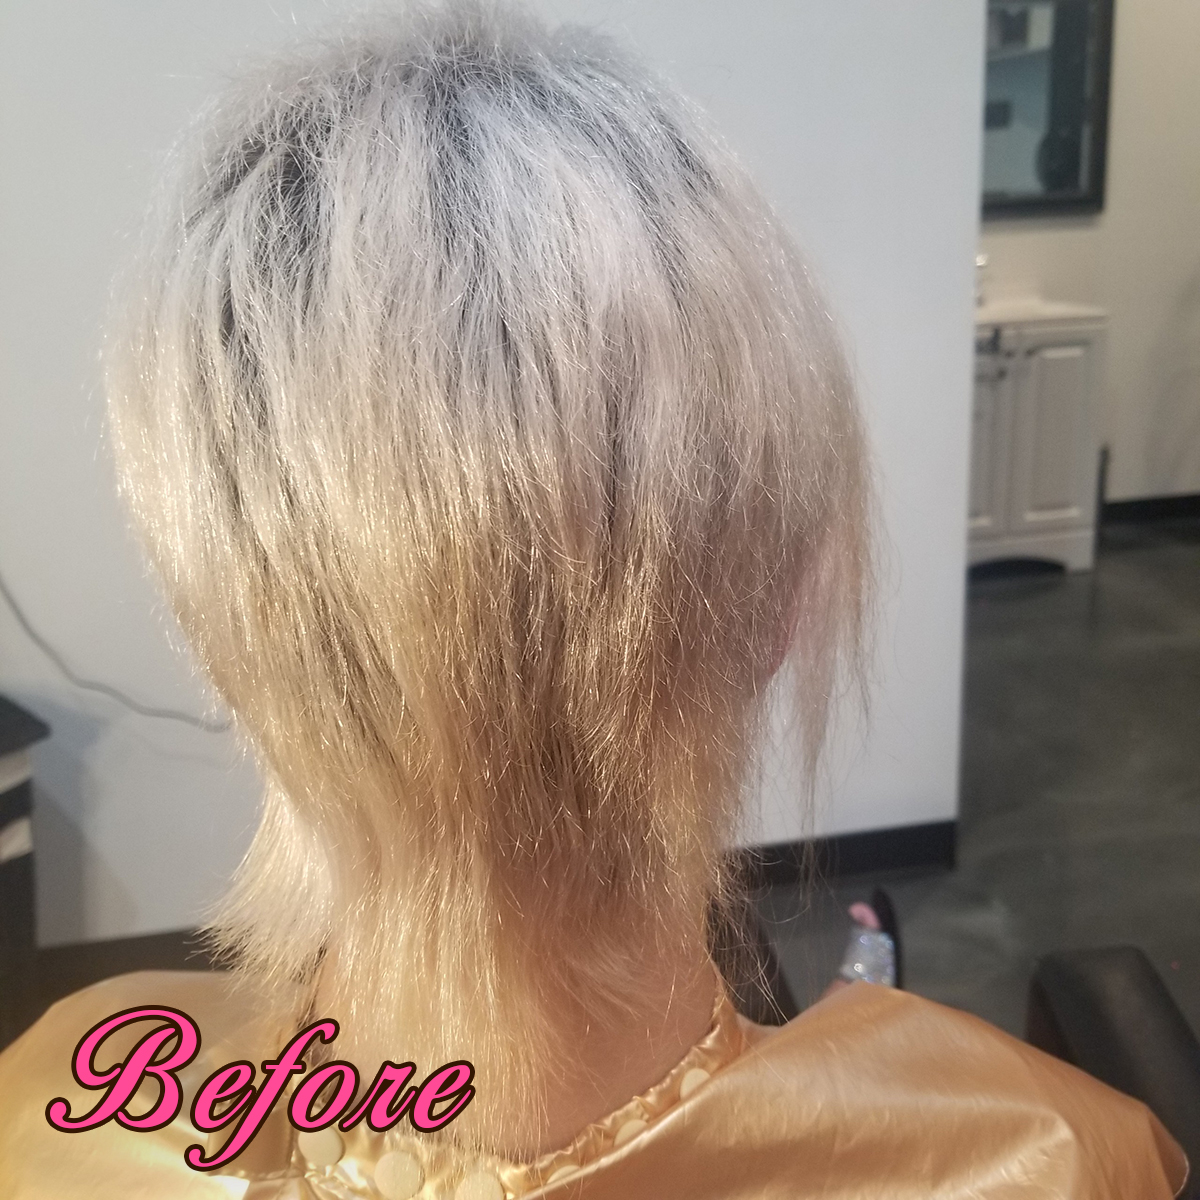 Gallery 105 - Before - Hair Extensions by Gricelda